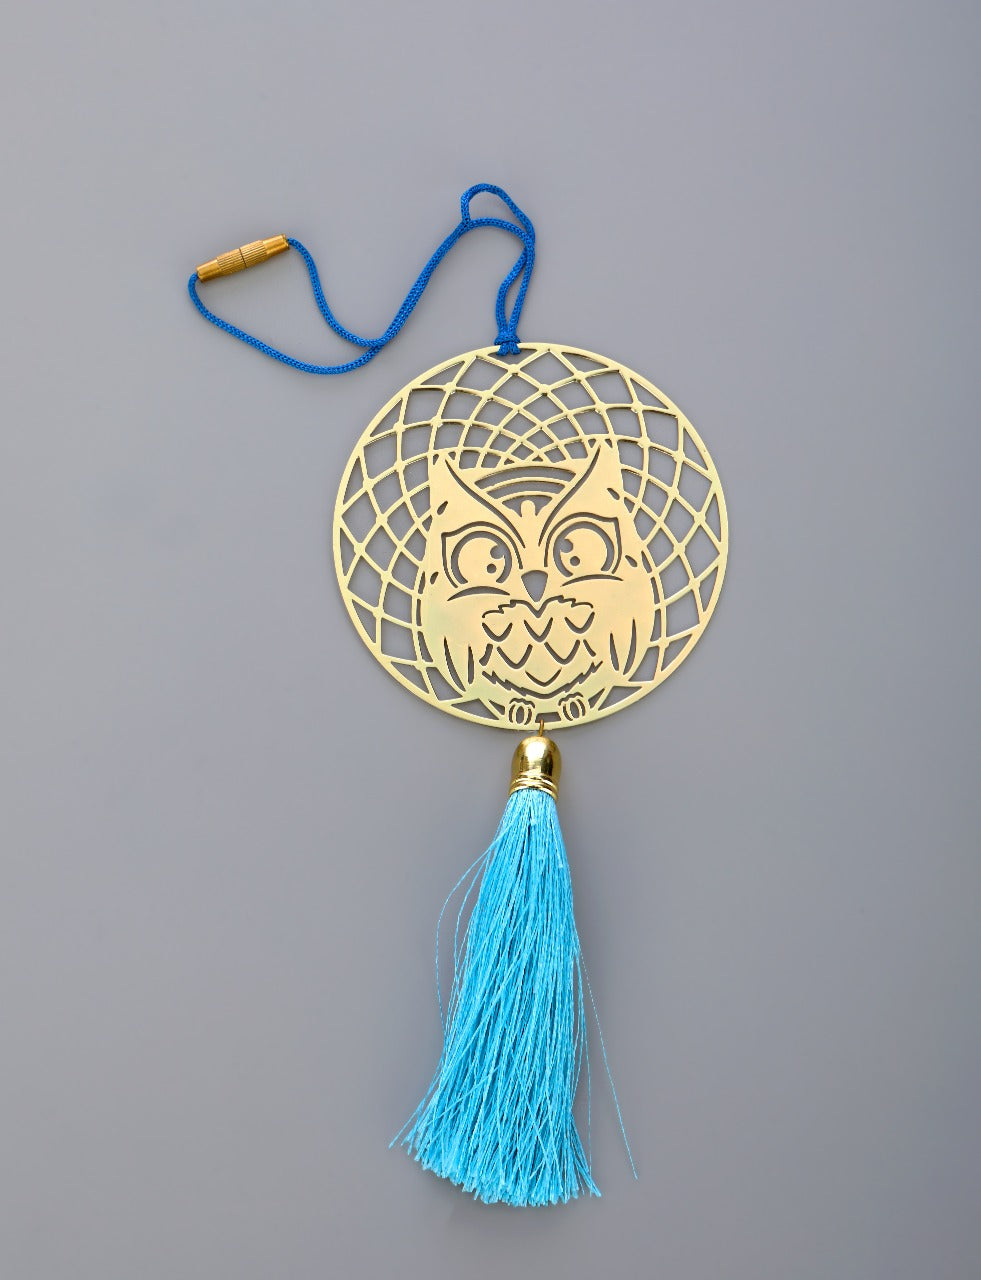 Owl car rear view mirror hanging décor in brass metal